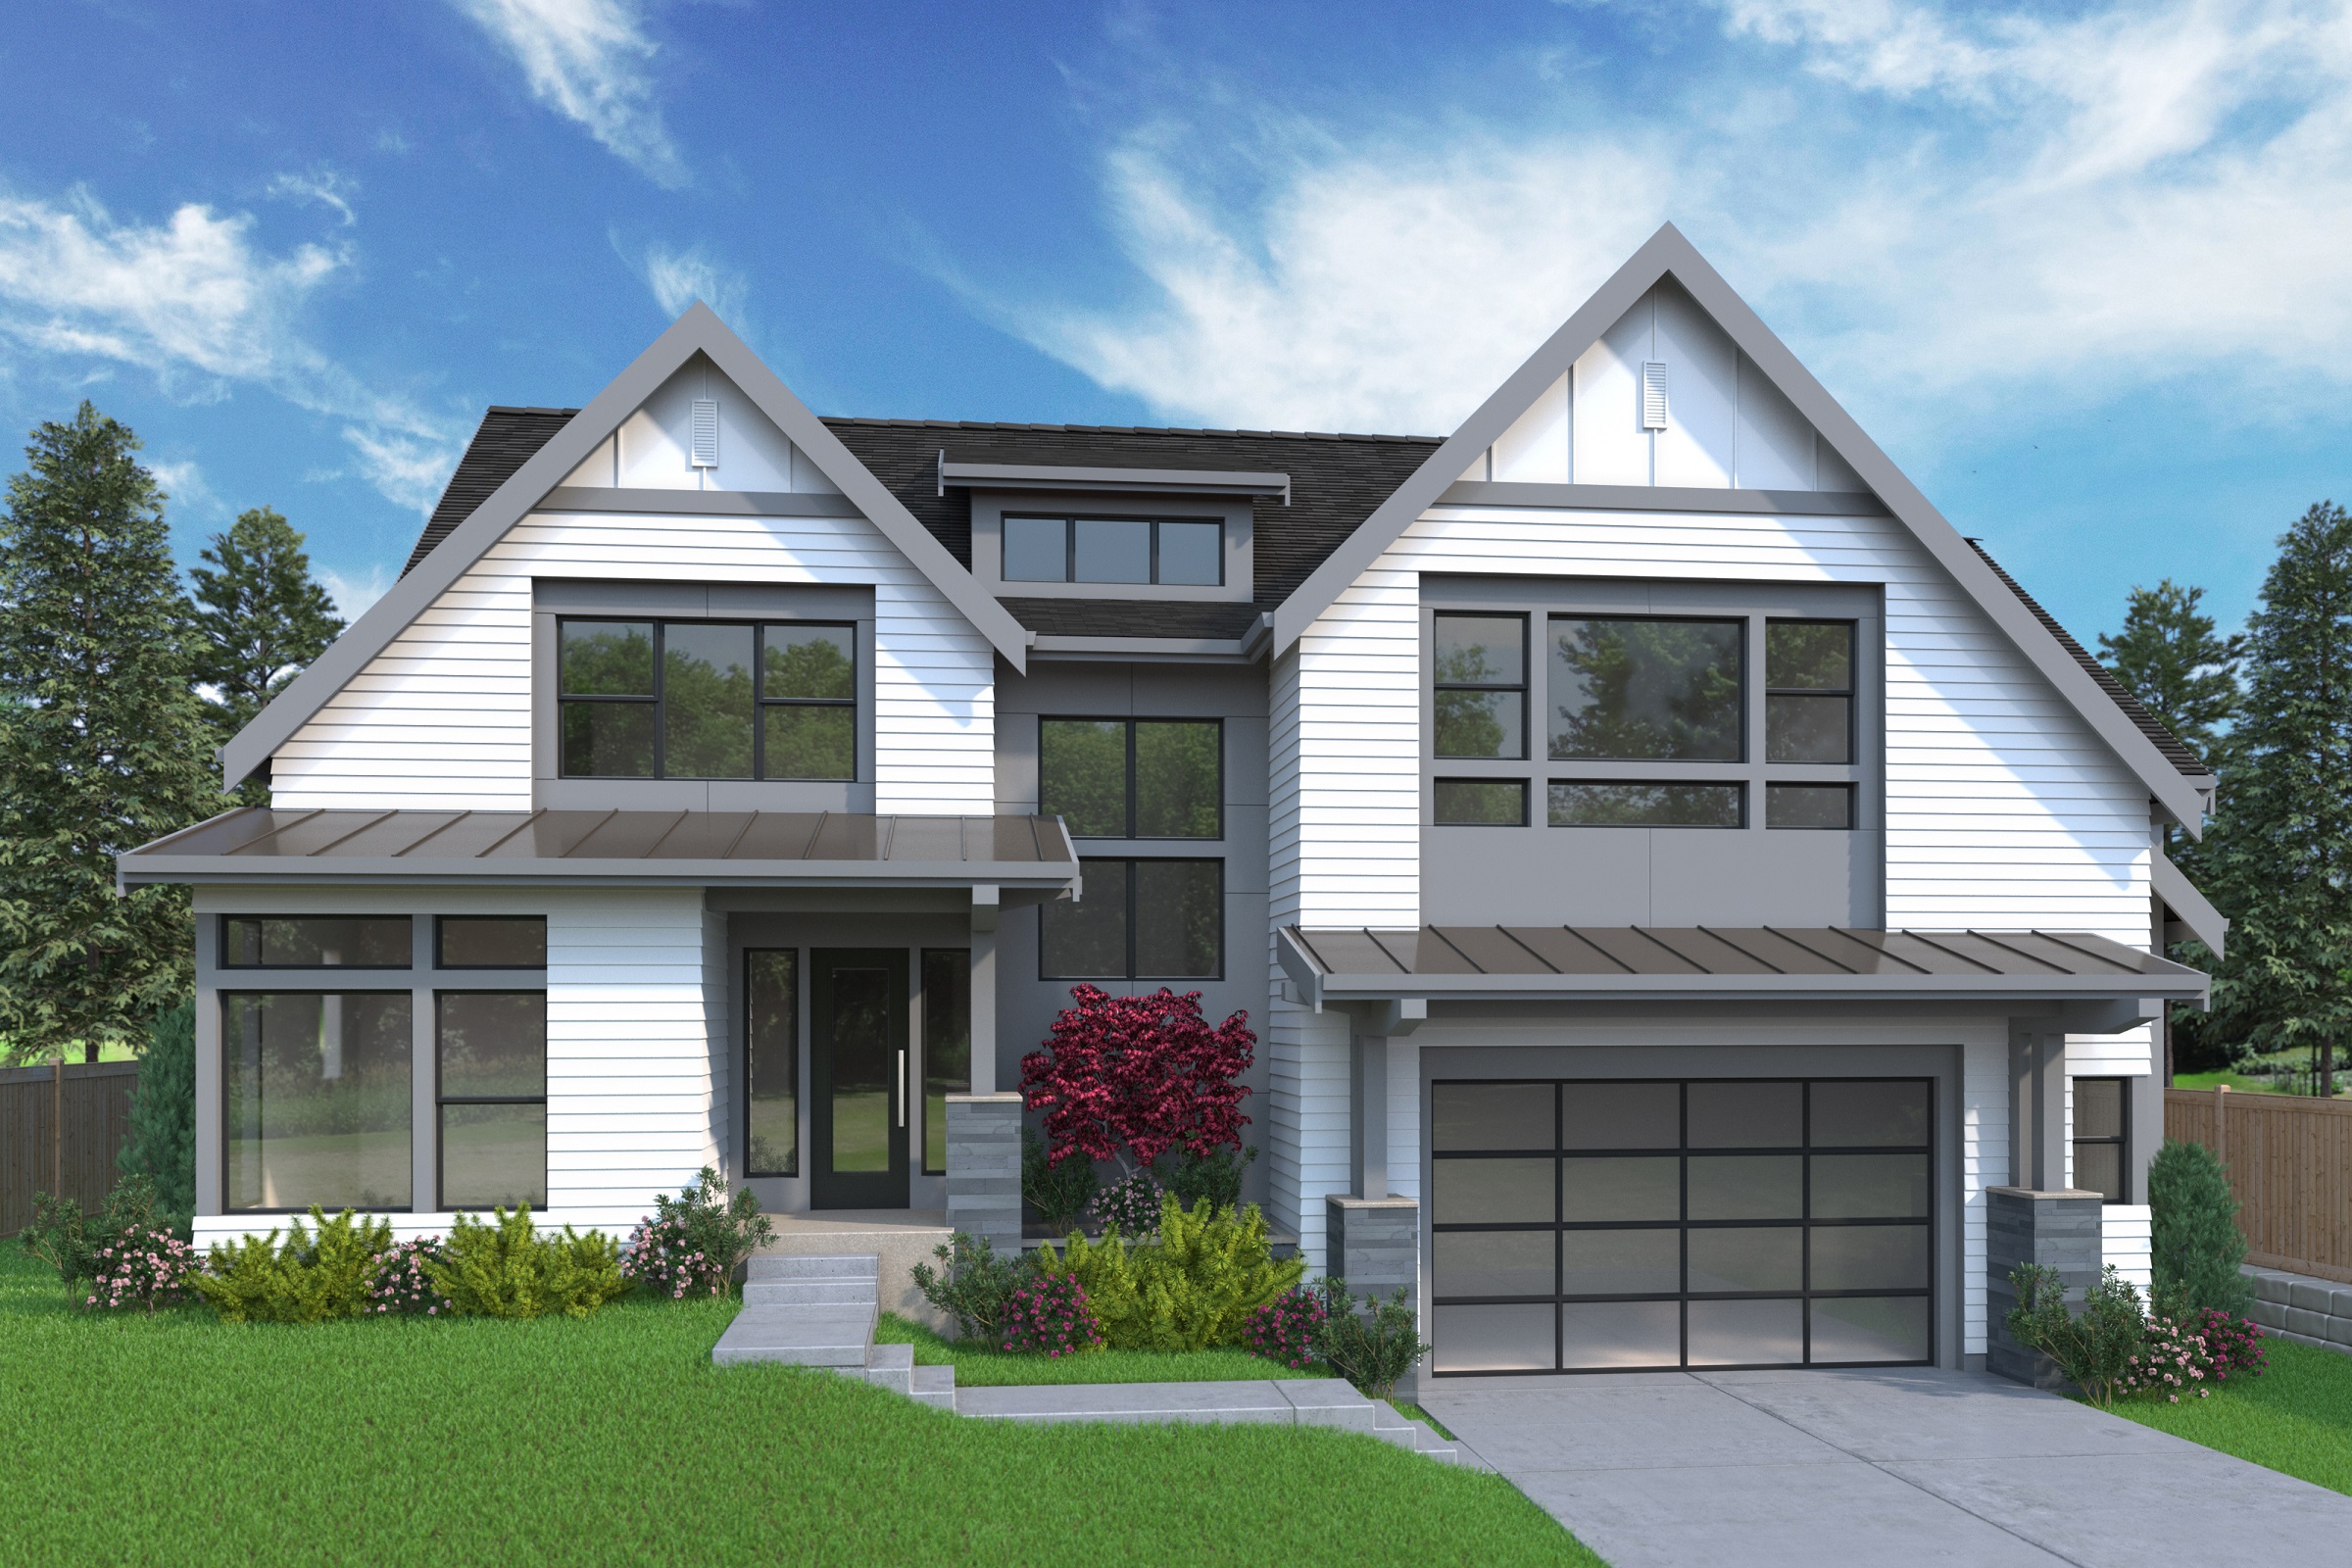 View our new luxury home construction on 16713 SE 2nd Pl, in Bellevue, WA from MN Custom Homes